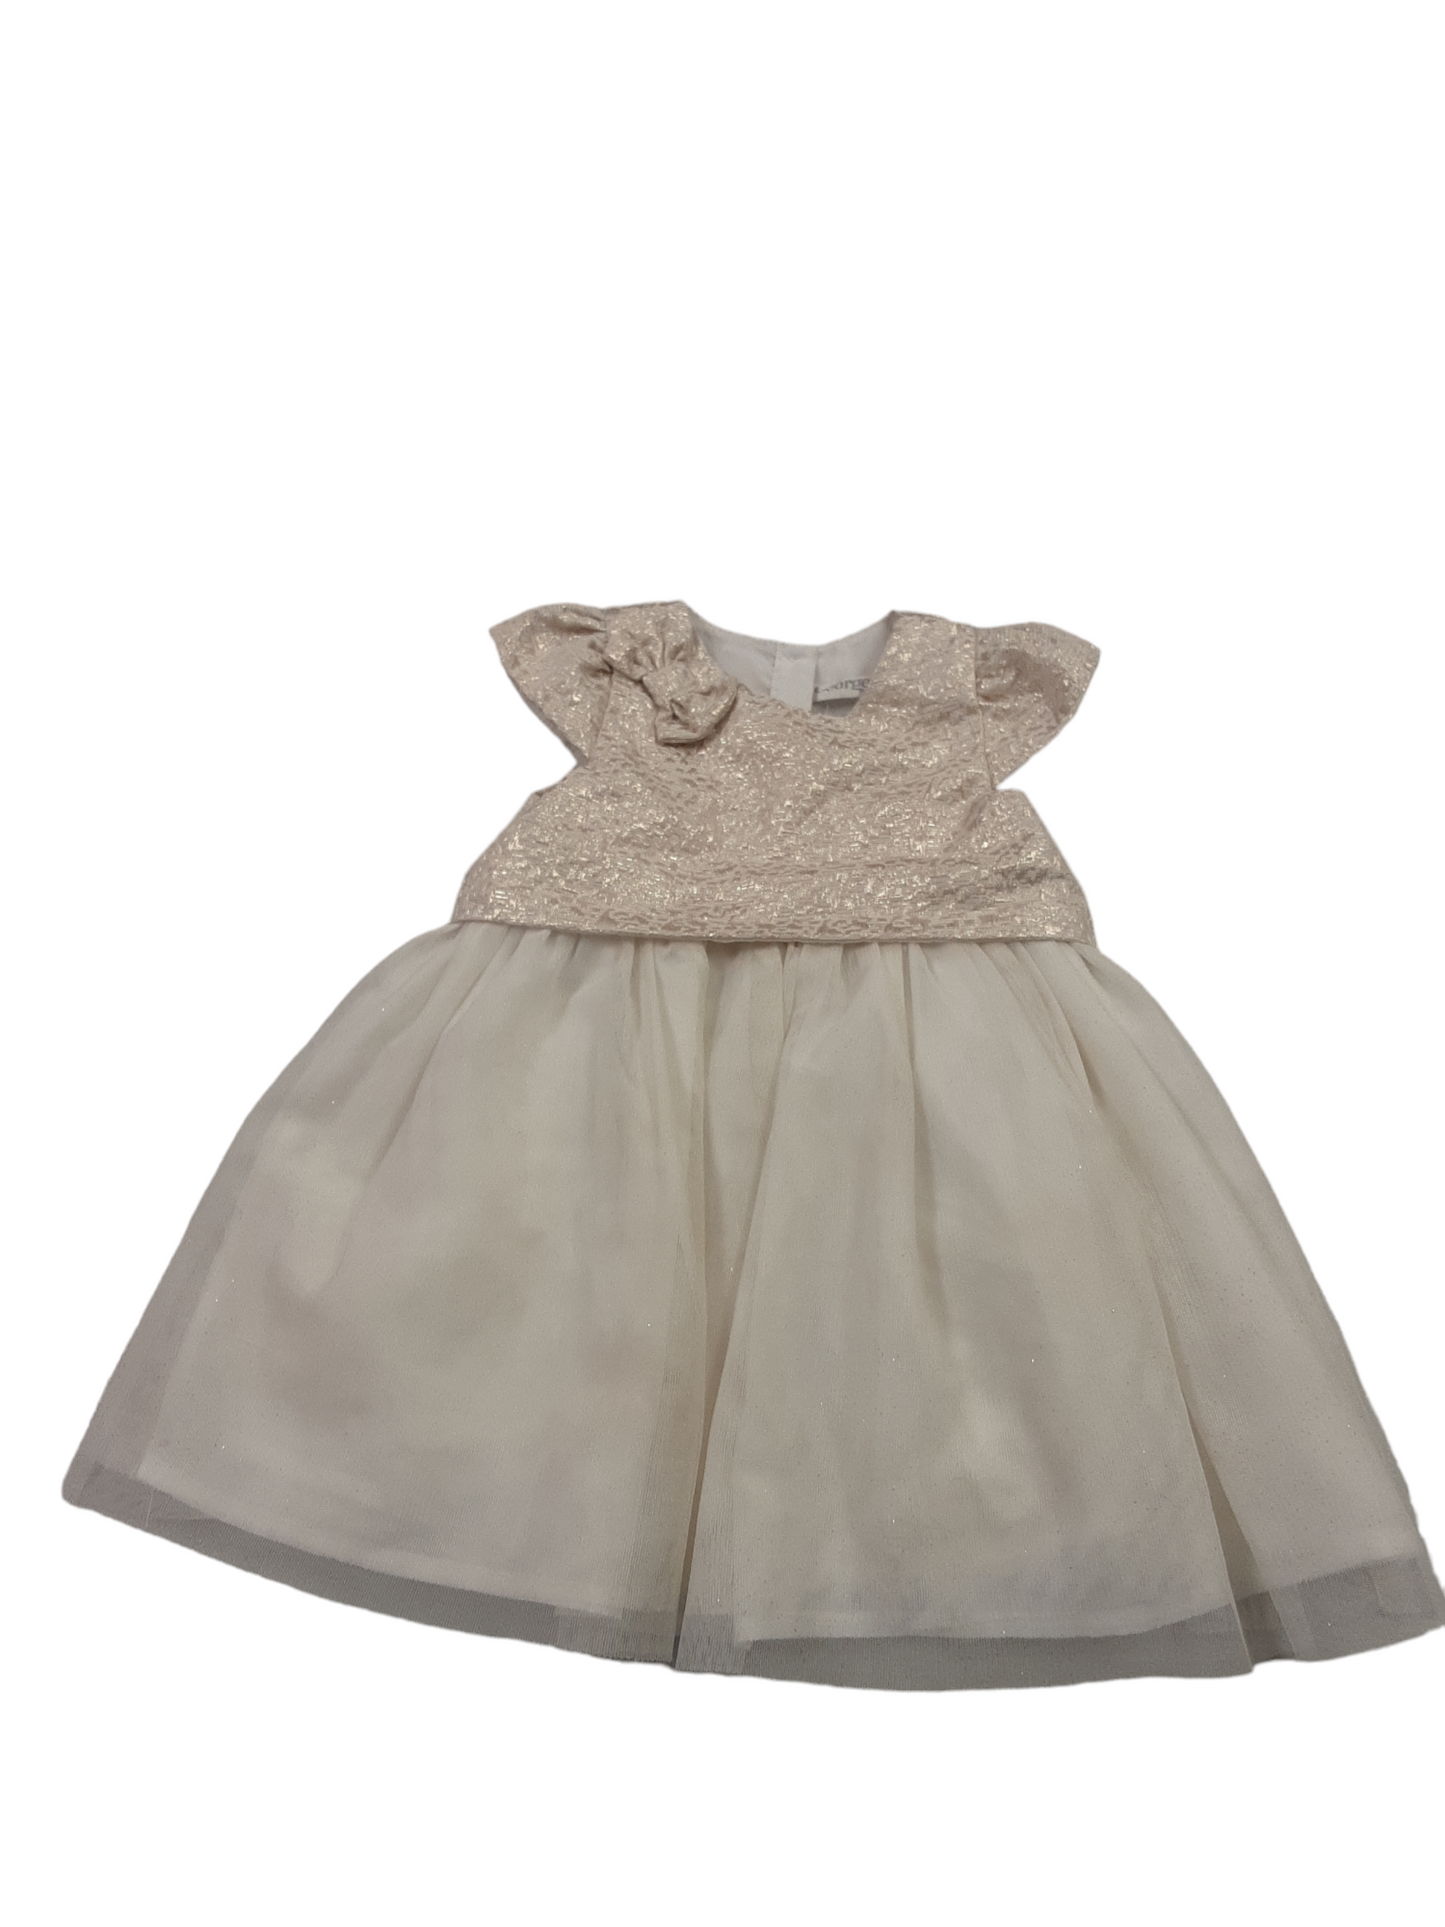 Gold/Cream special occasion dress size 12-18months